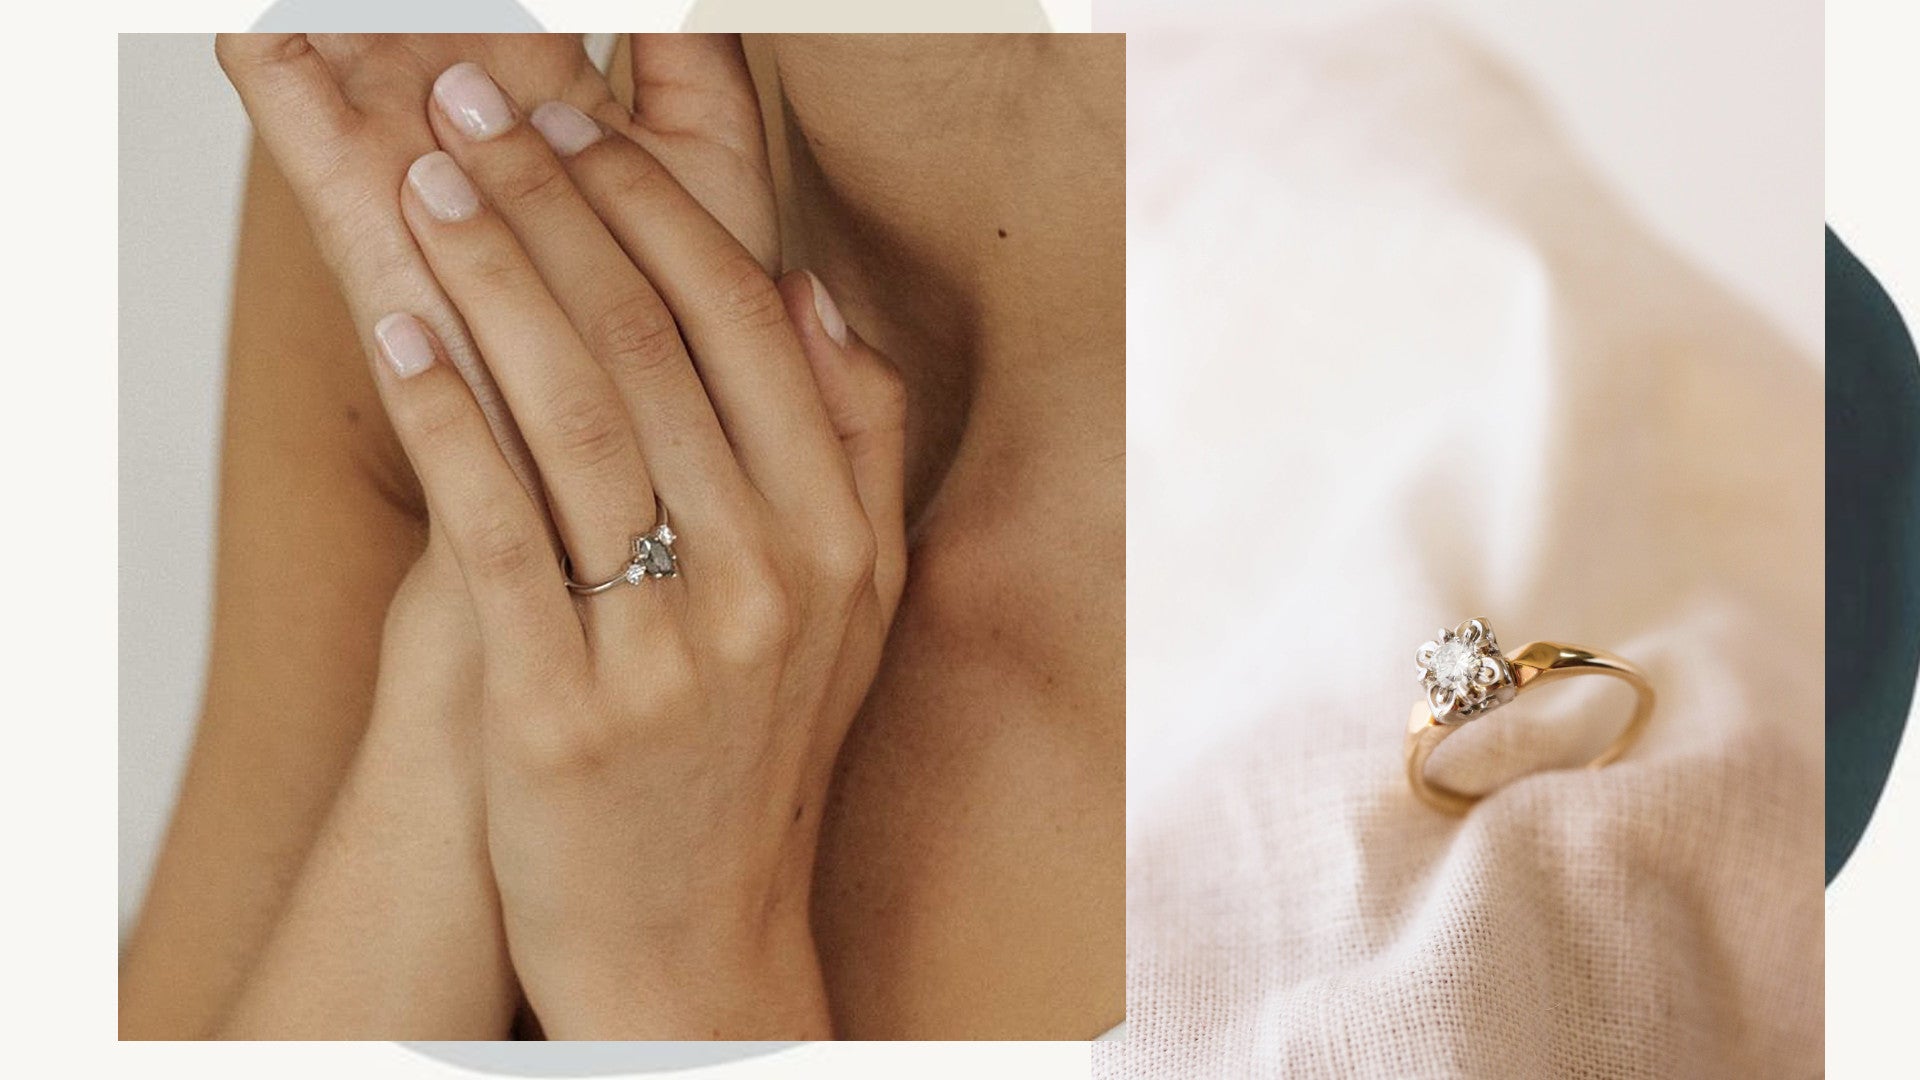 Vancouver handmade ethical diamond engagement rings